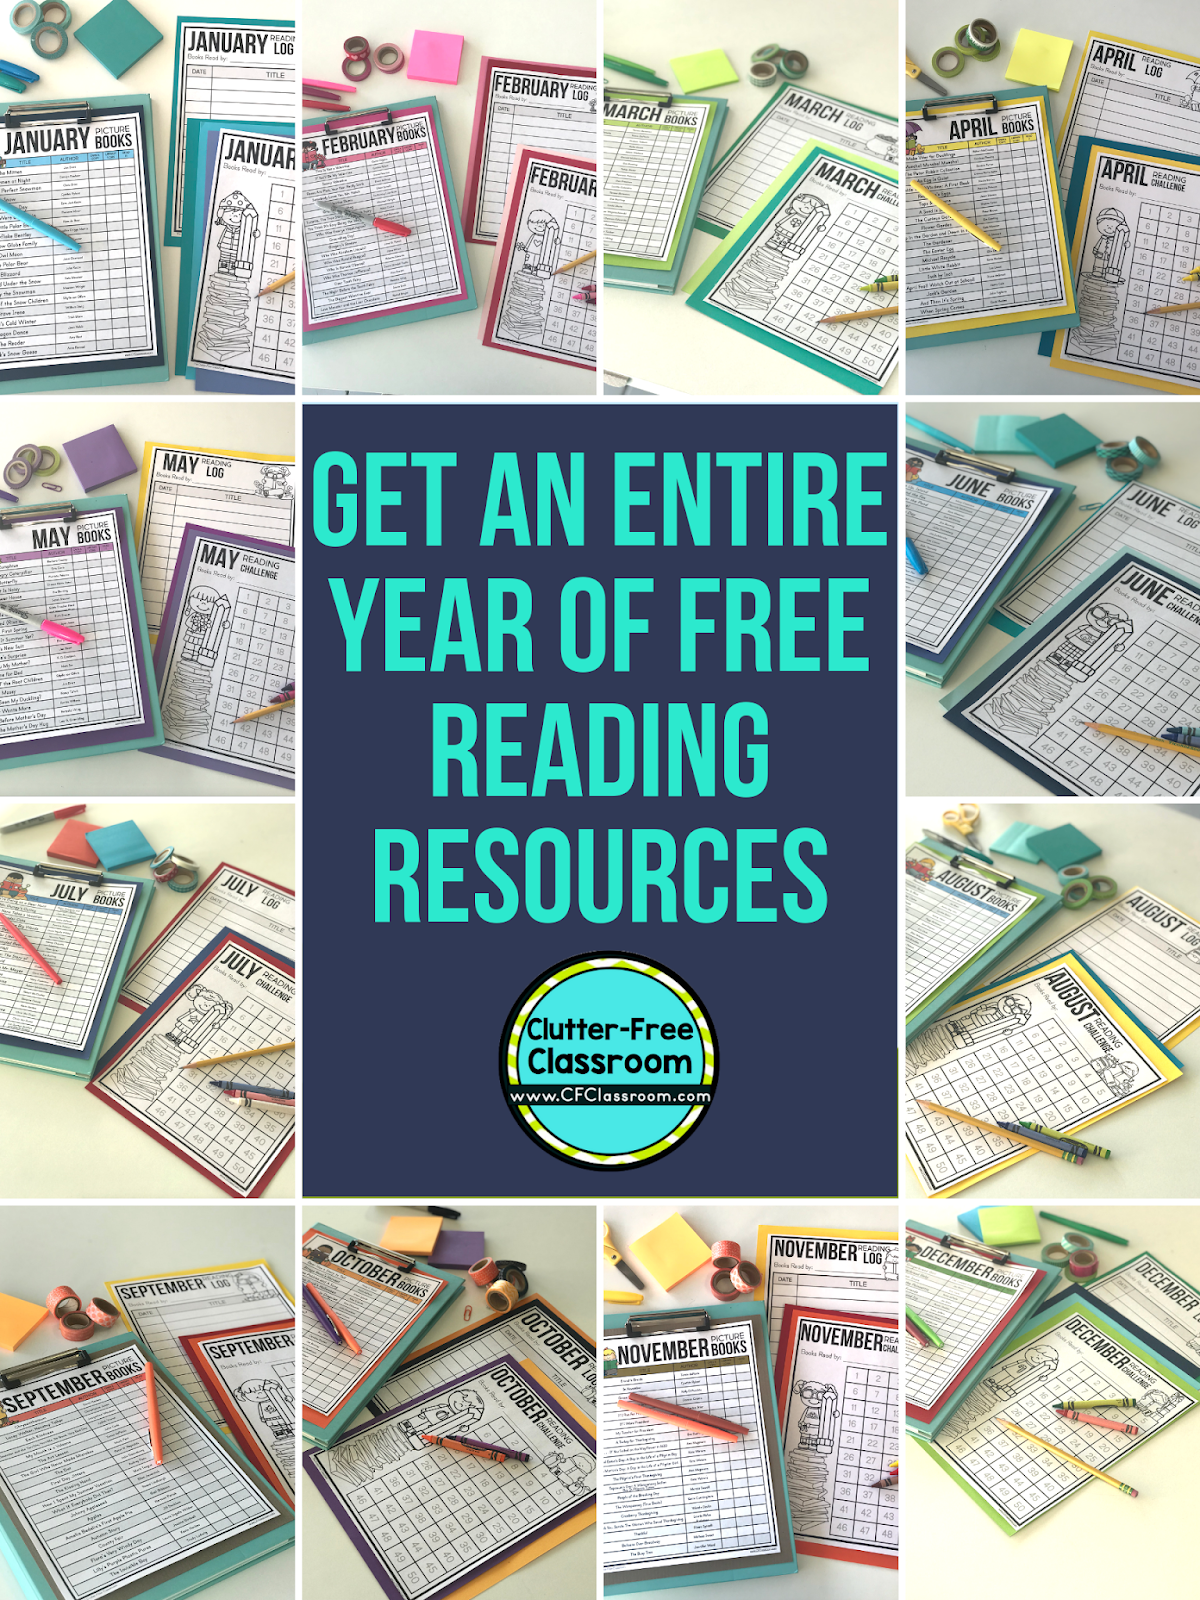 This free teaching resource includes a list of seasonal picture books for each month of the year, blank book lists for elementary teachers to record your own titles, printable reading logs for your students, and print and go monthly reading challenge charts. #booklist #readinglog #readingchallenge #readaloud #readalouds